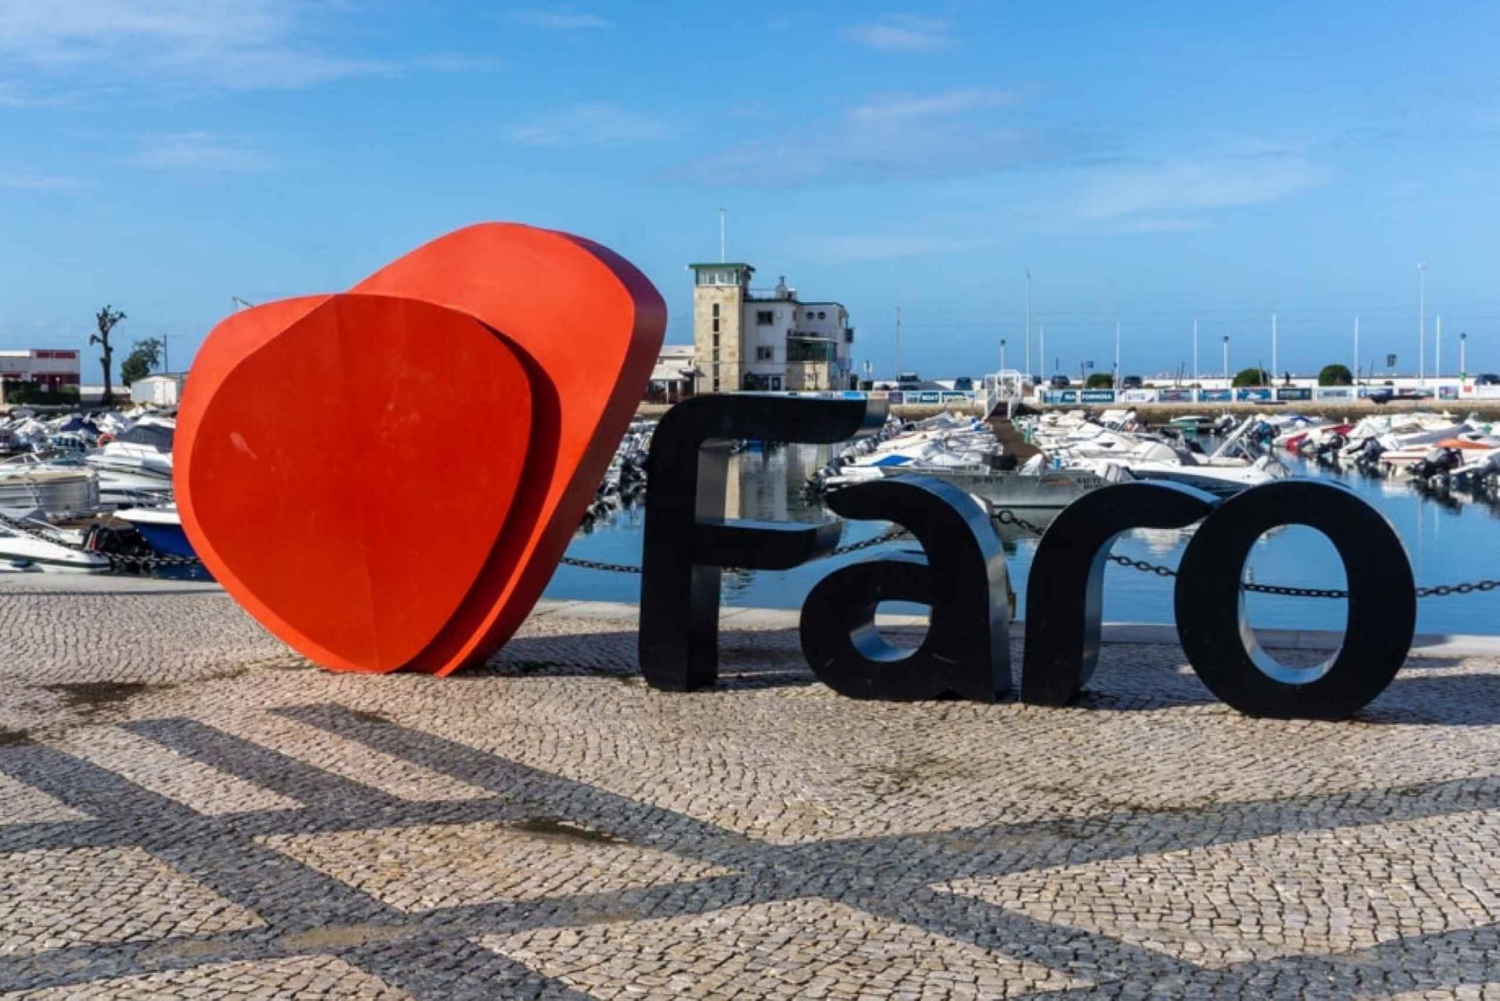 Faro Scavenger Hunt and Sights Self-Guided Tour